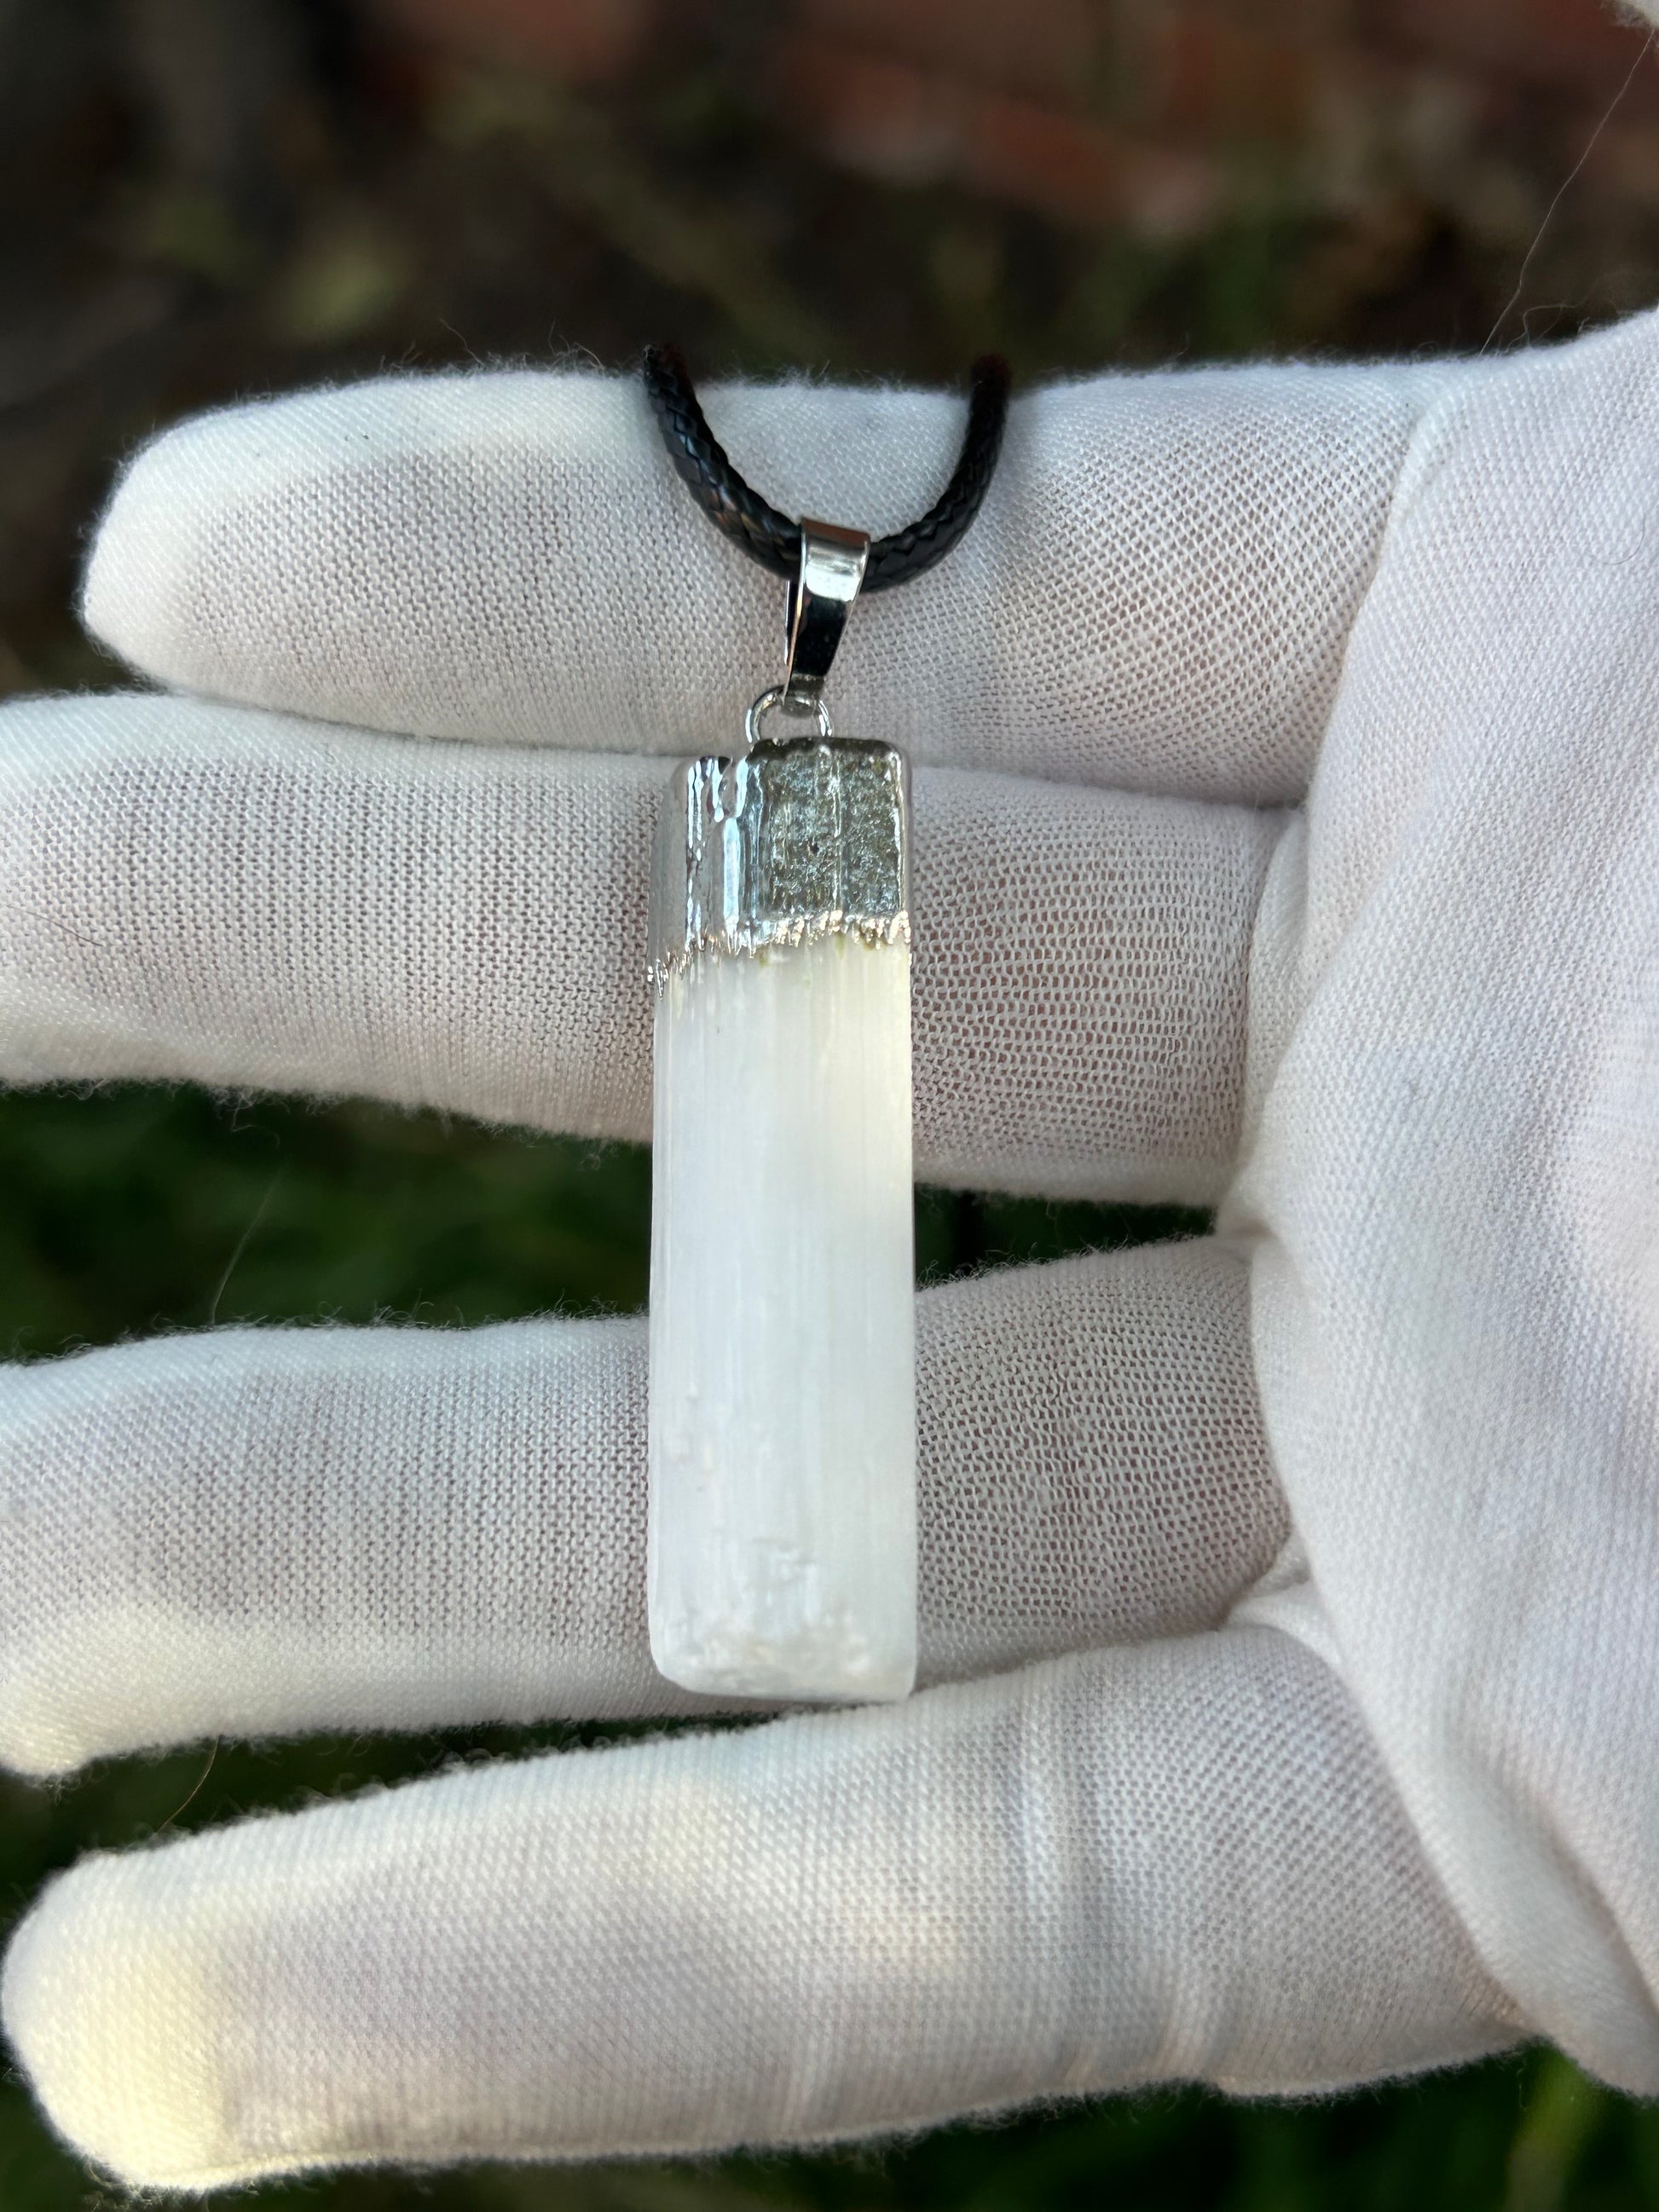 irregular selenite cuboid pendant with silver detail and black cord necklace